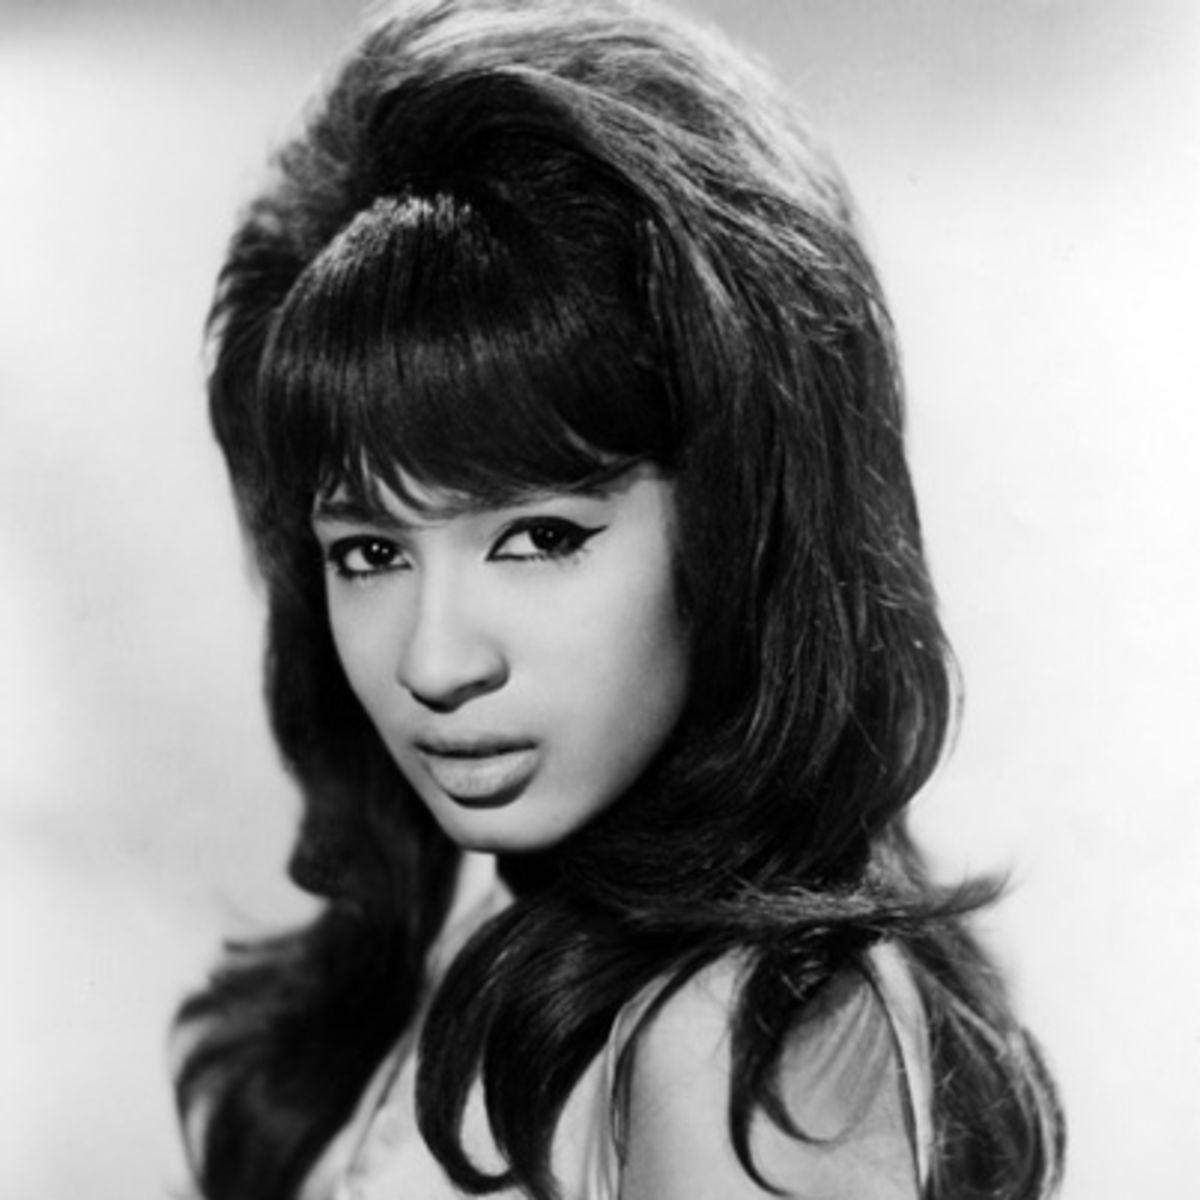 Happy Birthday to Ronnie Spector, who turns 72 today! 